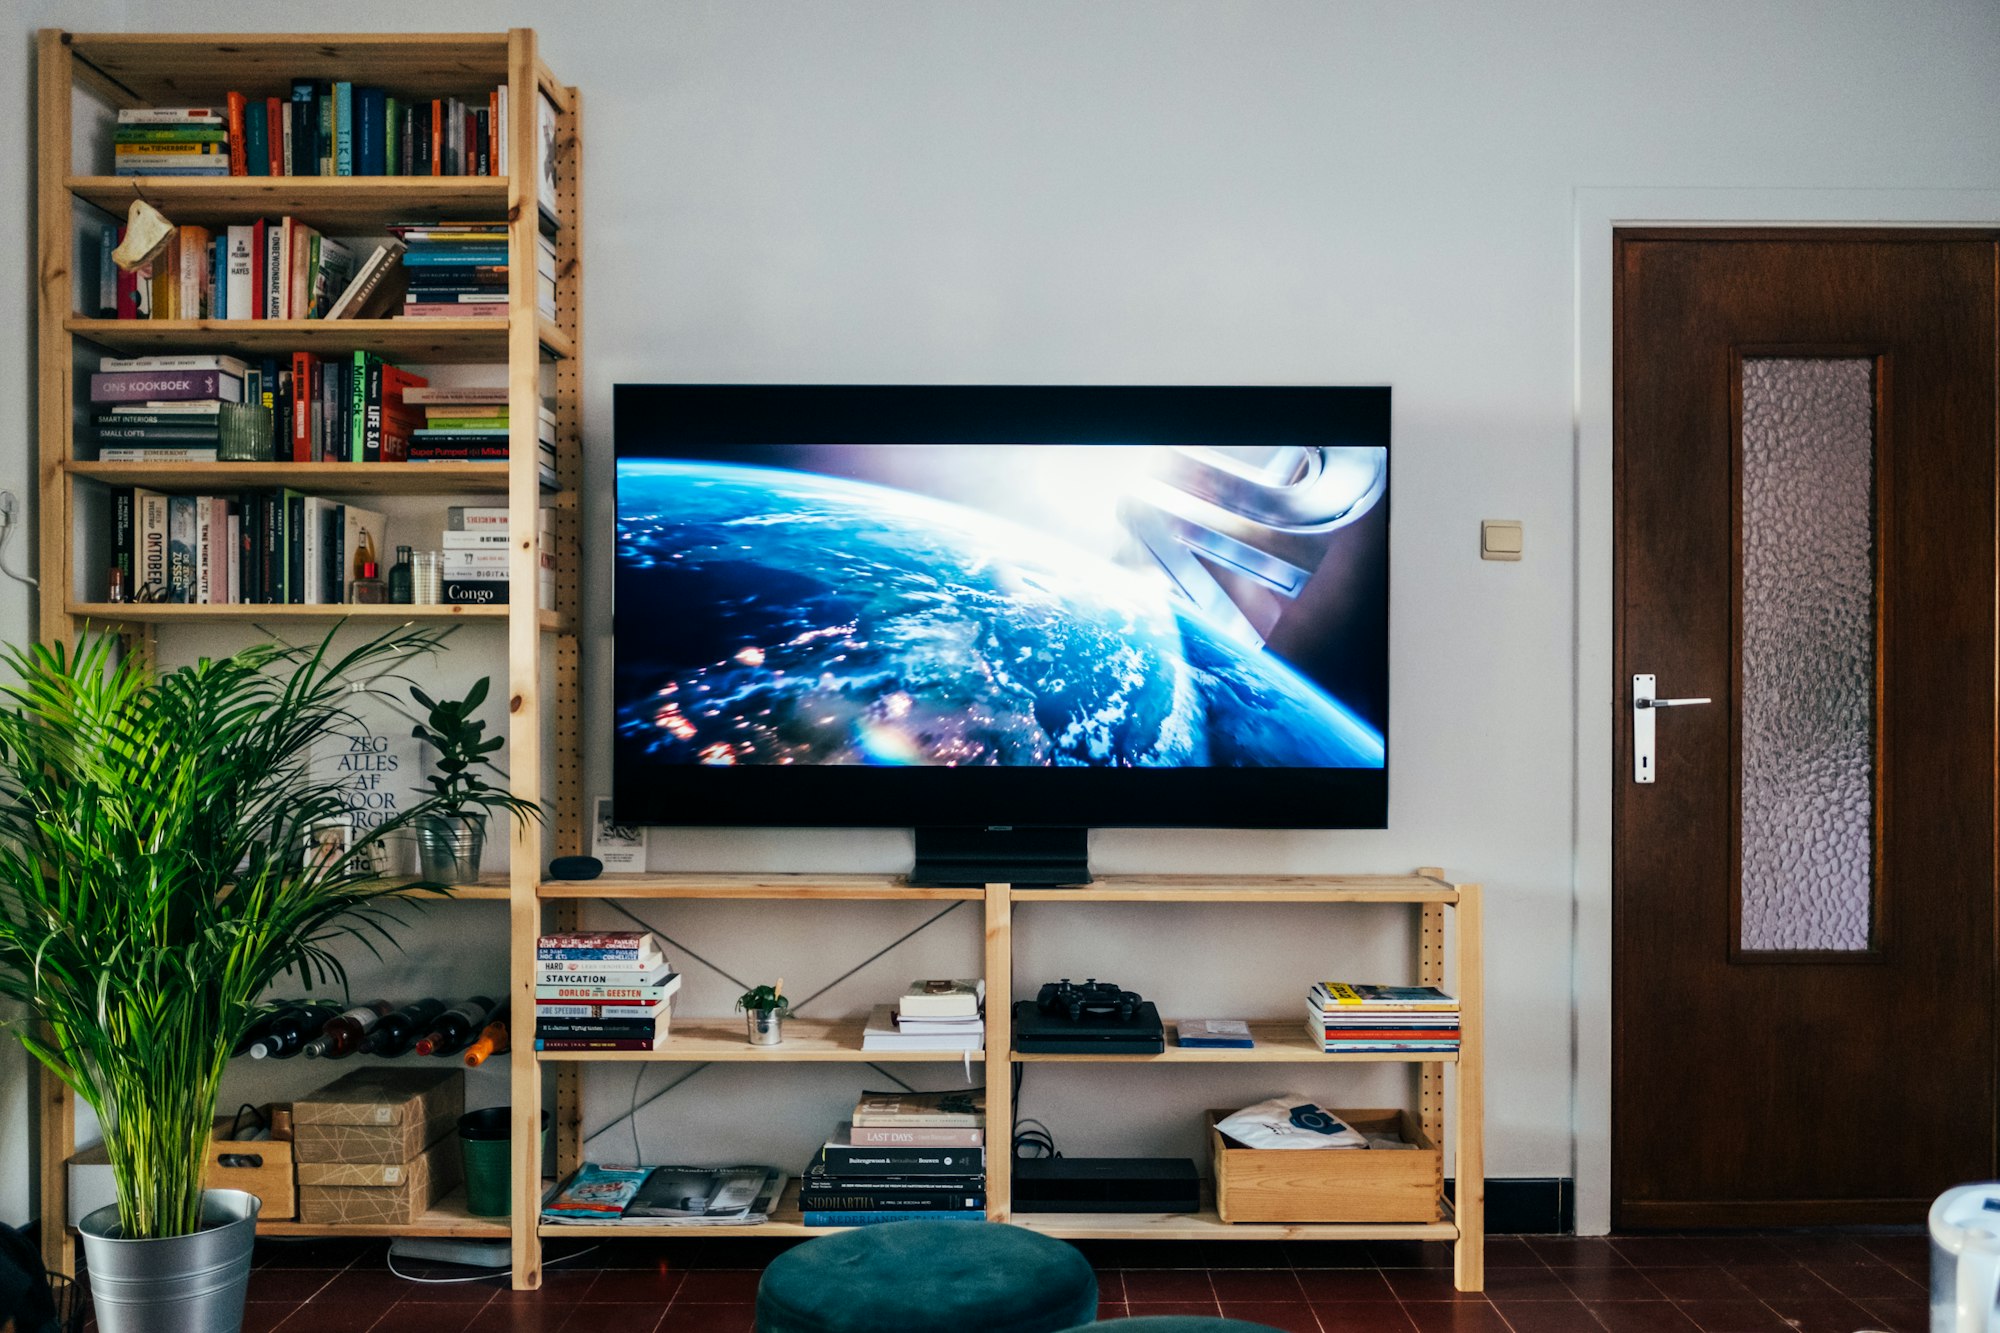 Smart TV features that'll make your life easier